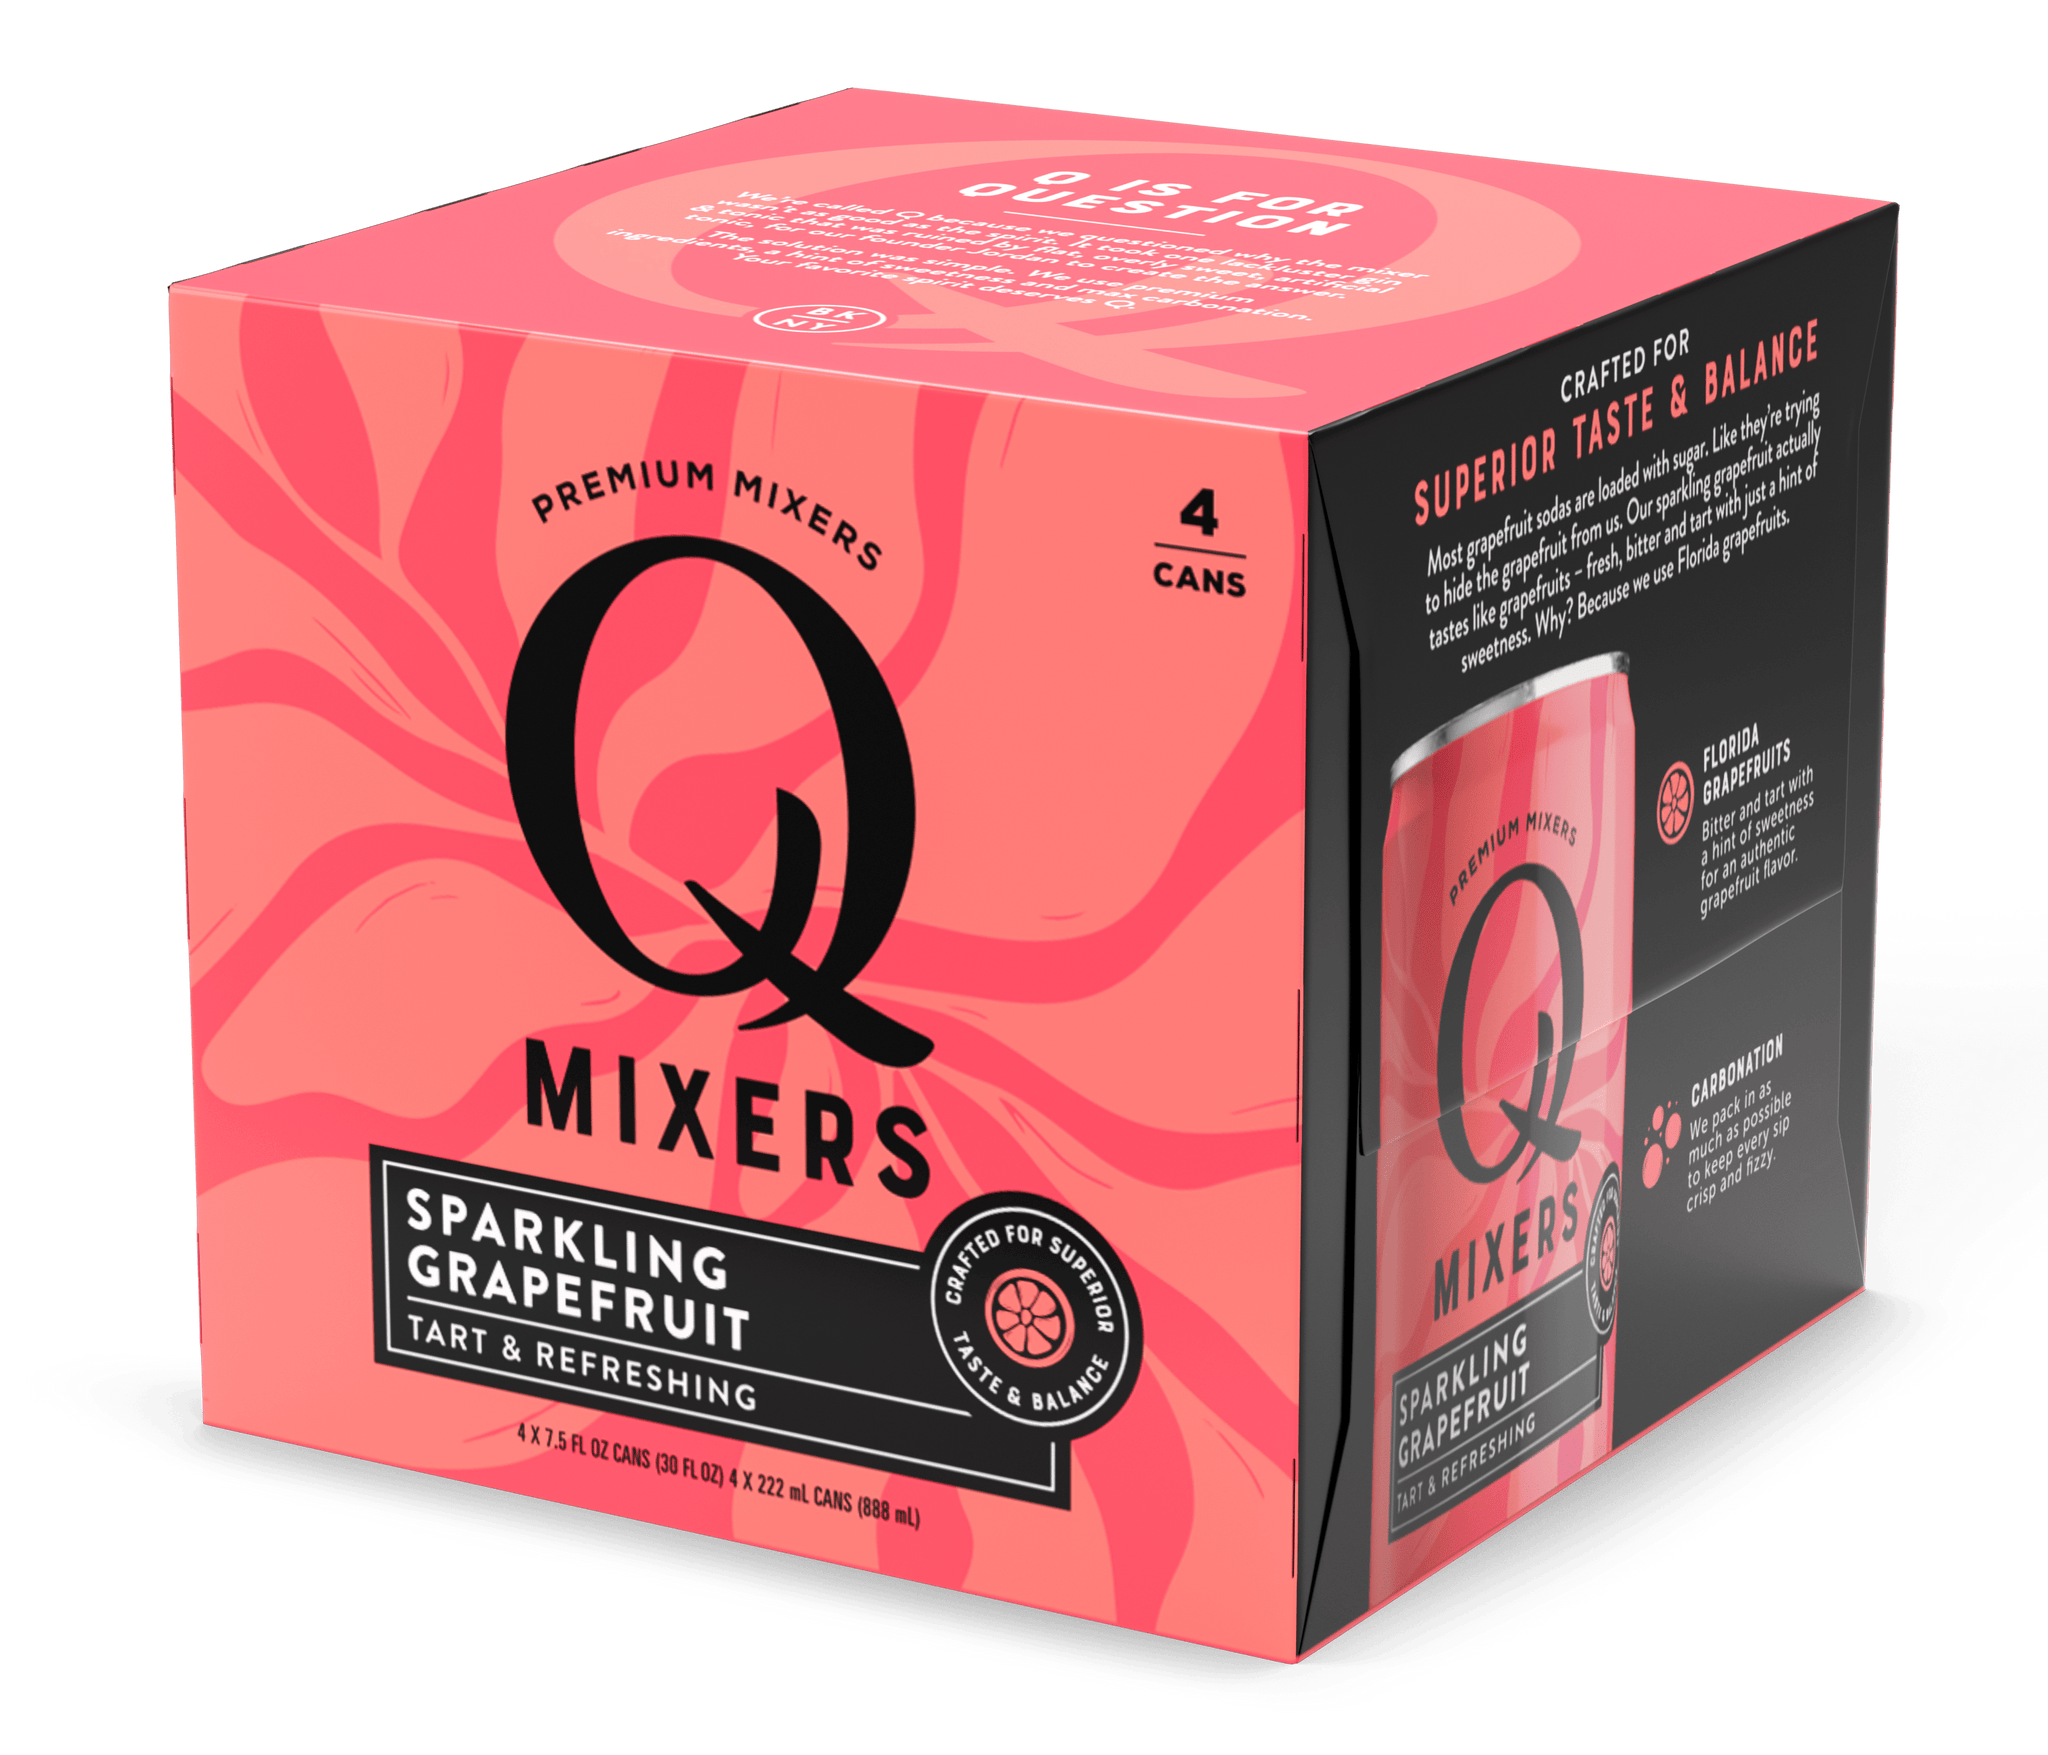 Q Mixers Sparkling Grapefruit, Premium Cocktail Mixer with Real Ingredients, 7.5 fl oz (Pack of 24)